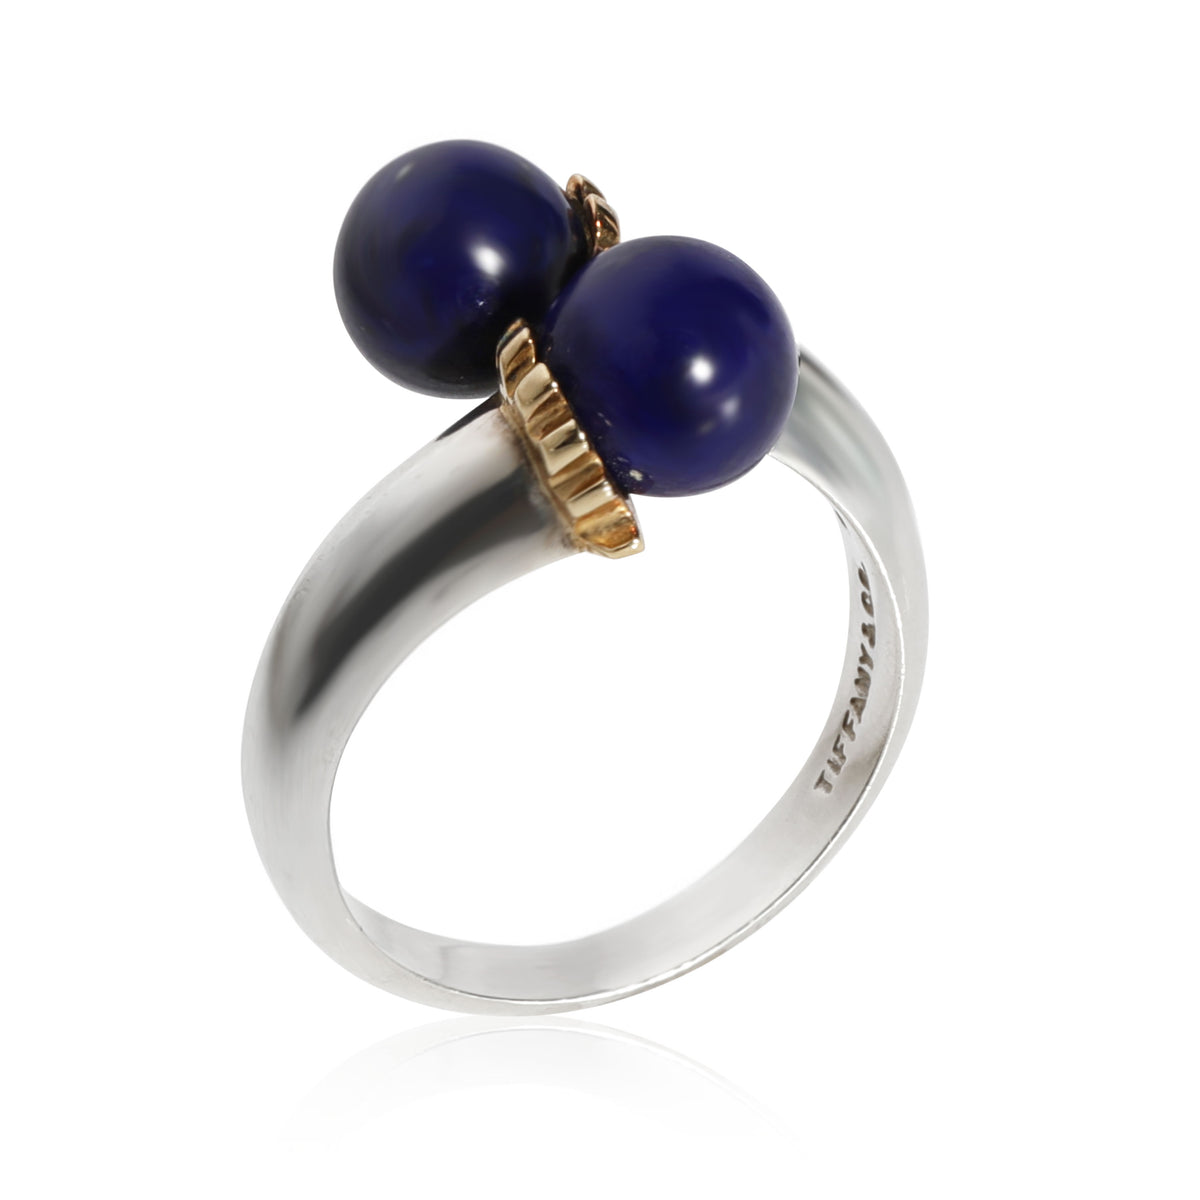 Tiffany & Co. Lapis Ring in 18K Yellow Gold/Sterling Silver